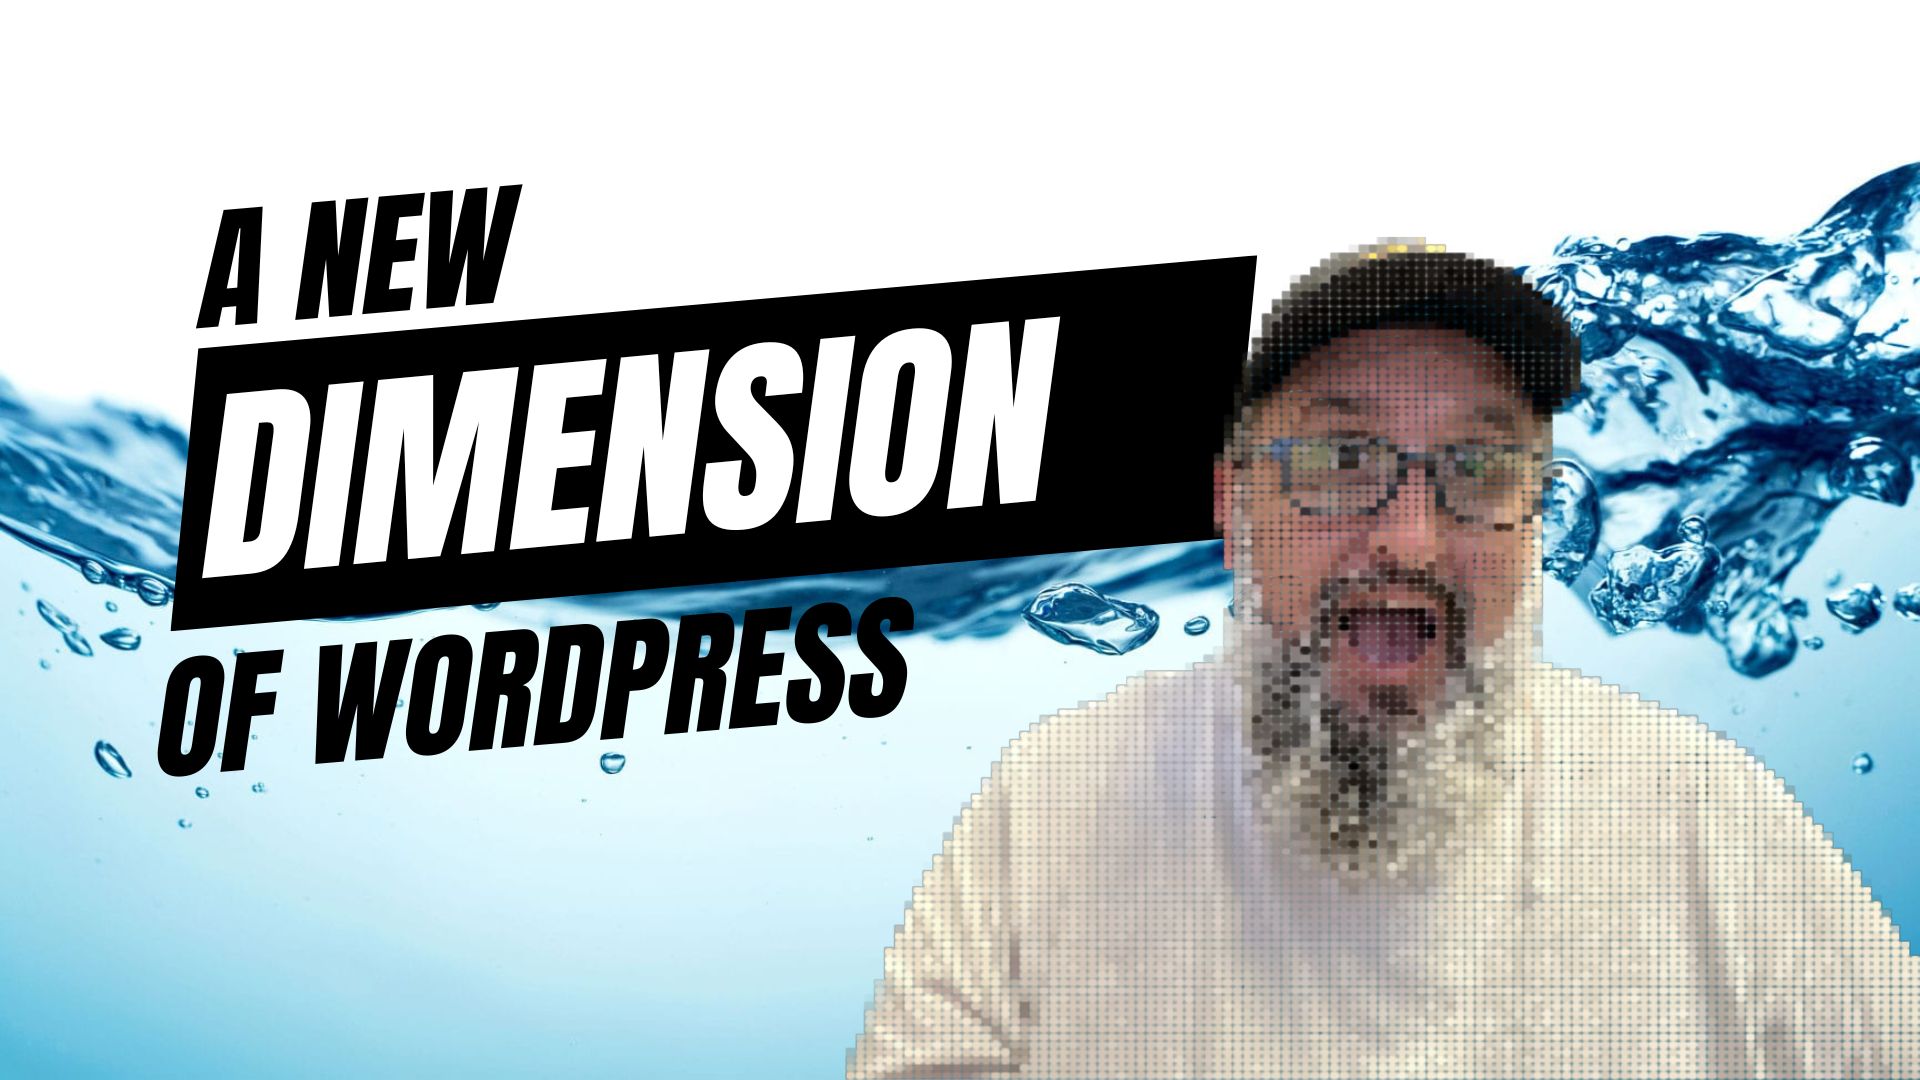 EP436 - A New Dimension of WordPress